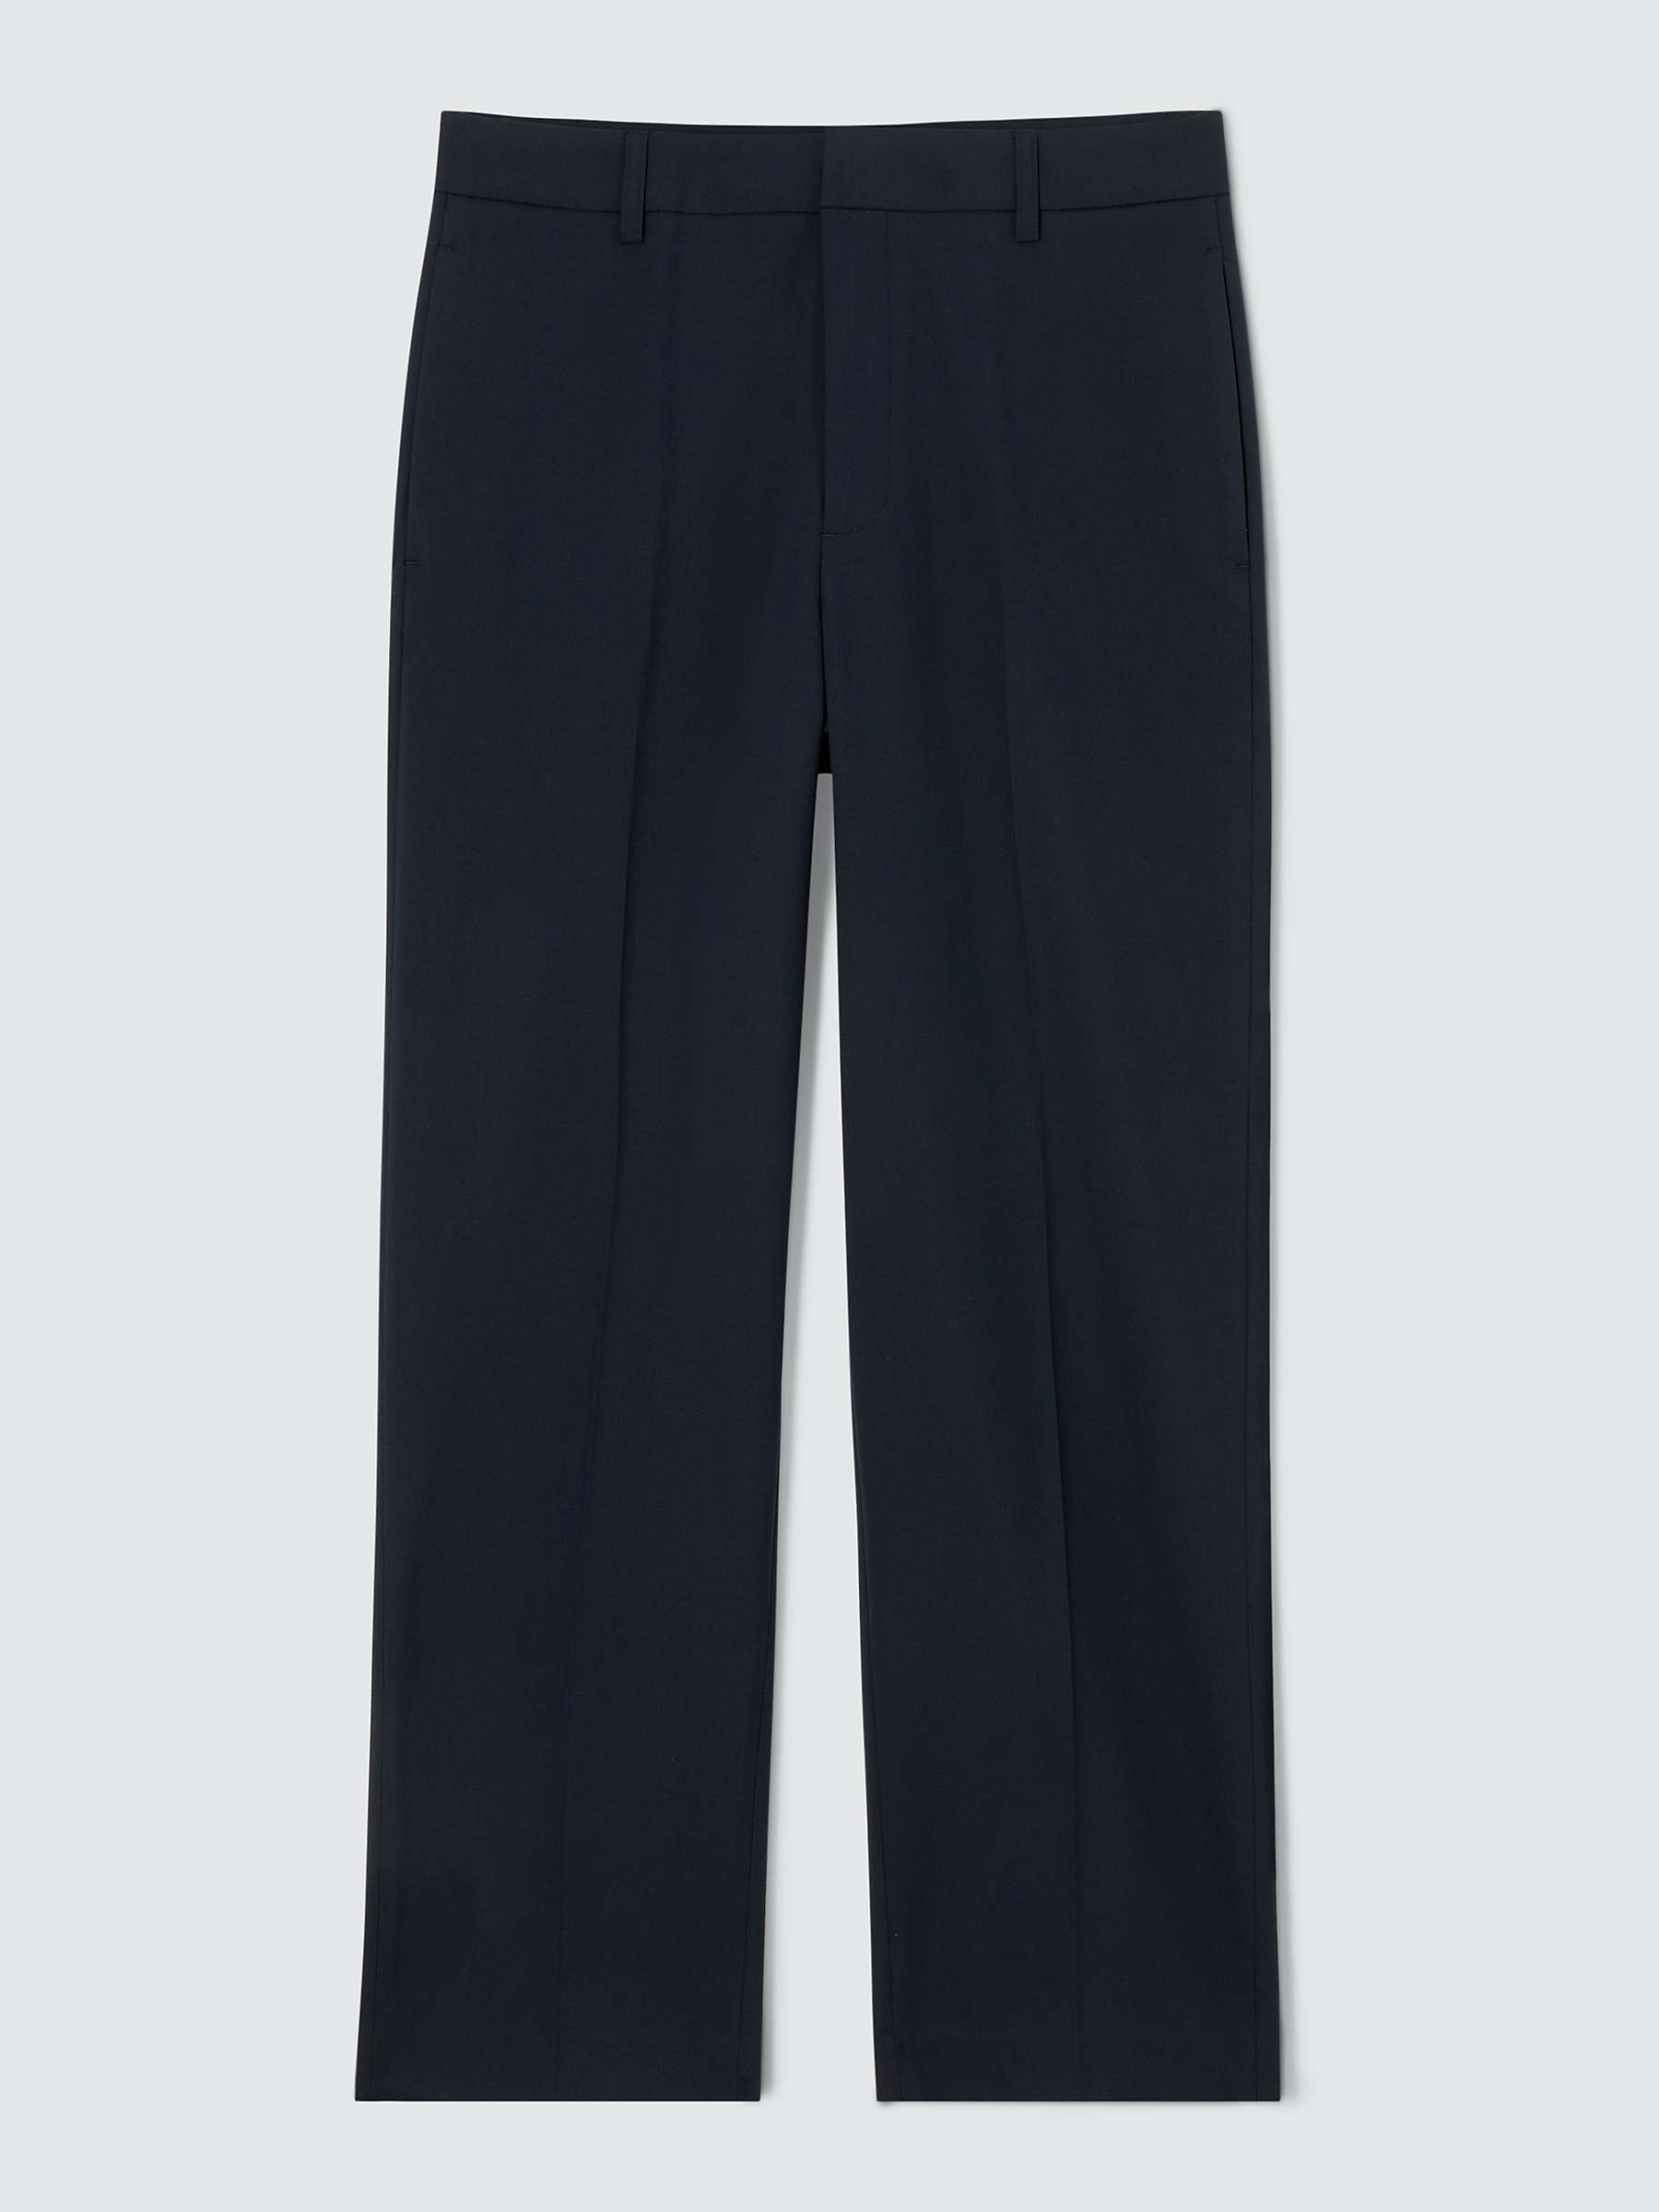 Buy Kin Relaxed Fit Trousers, Dark Navy Online at johnlewis.com